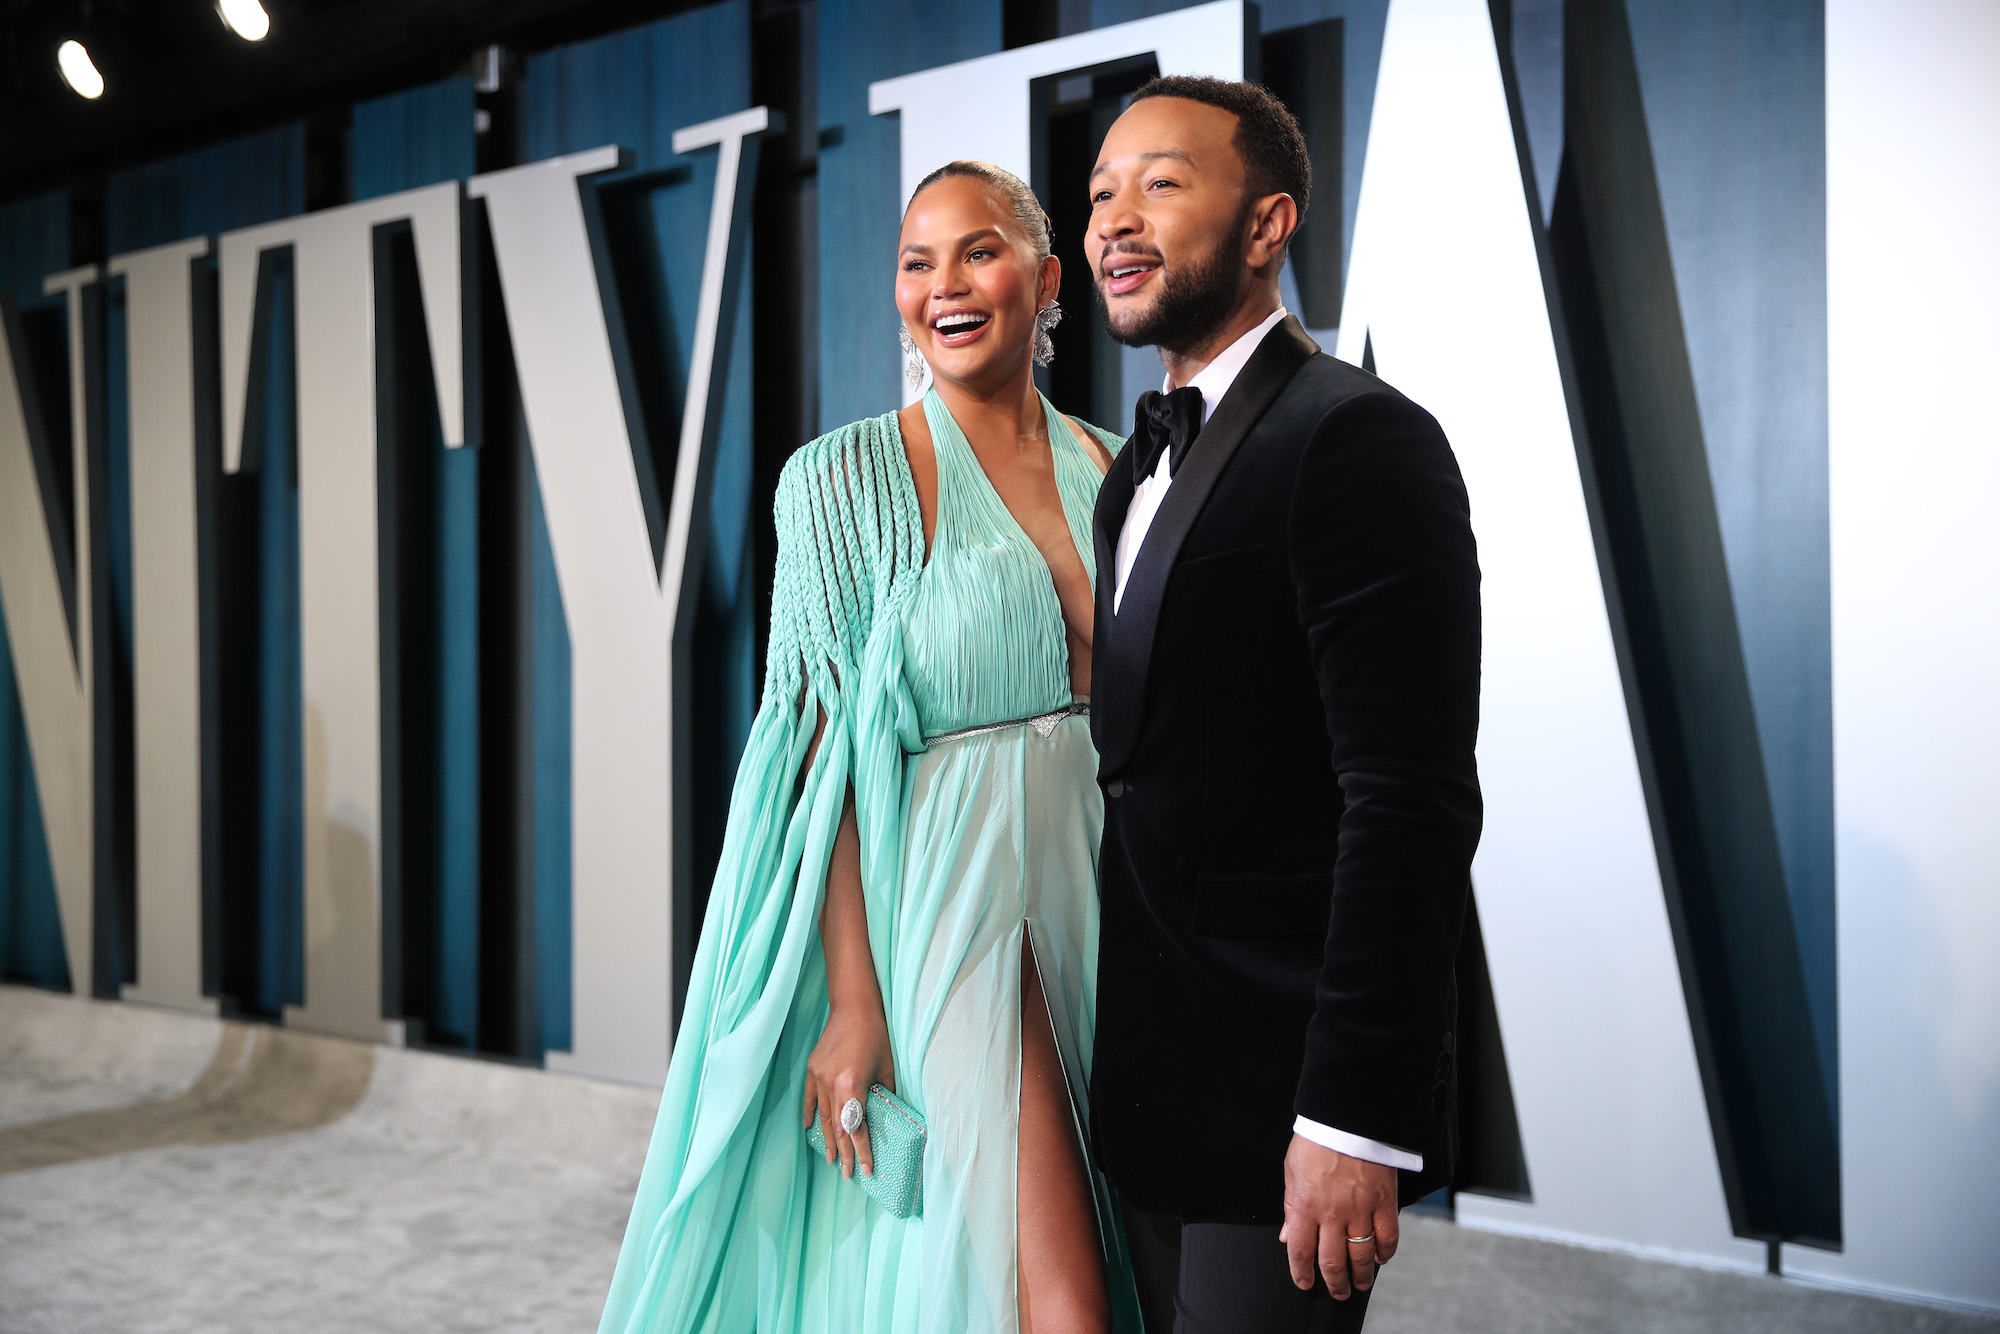 (L-R) Chrissy Teigen and John Legend smiling in front of a blue and white background on an awards show carpet